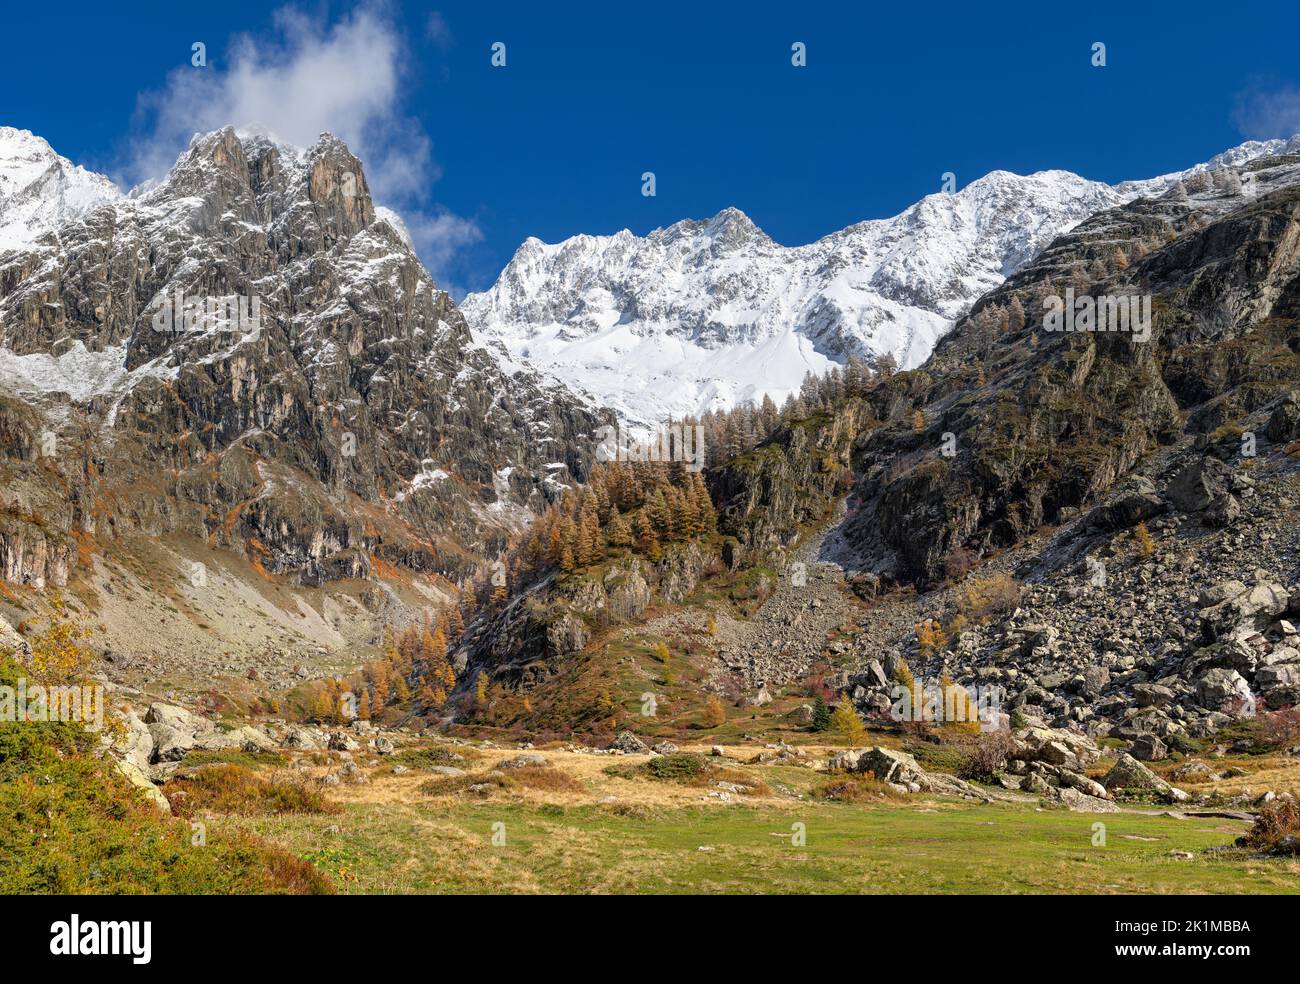 Gioberney Cirque in the Ecrins National Park in Autumn. Famous for its hiking trails (GR 54) and views of the Ecrins Massif. Valgaudemar, Alps, France Stock Photo